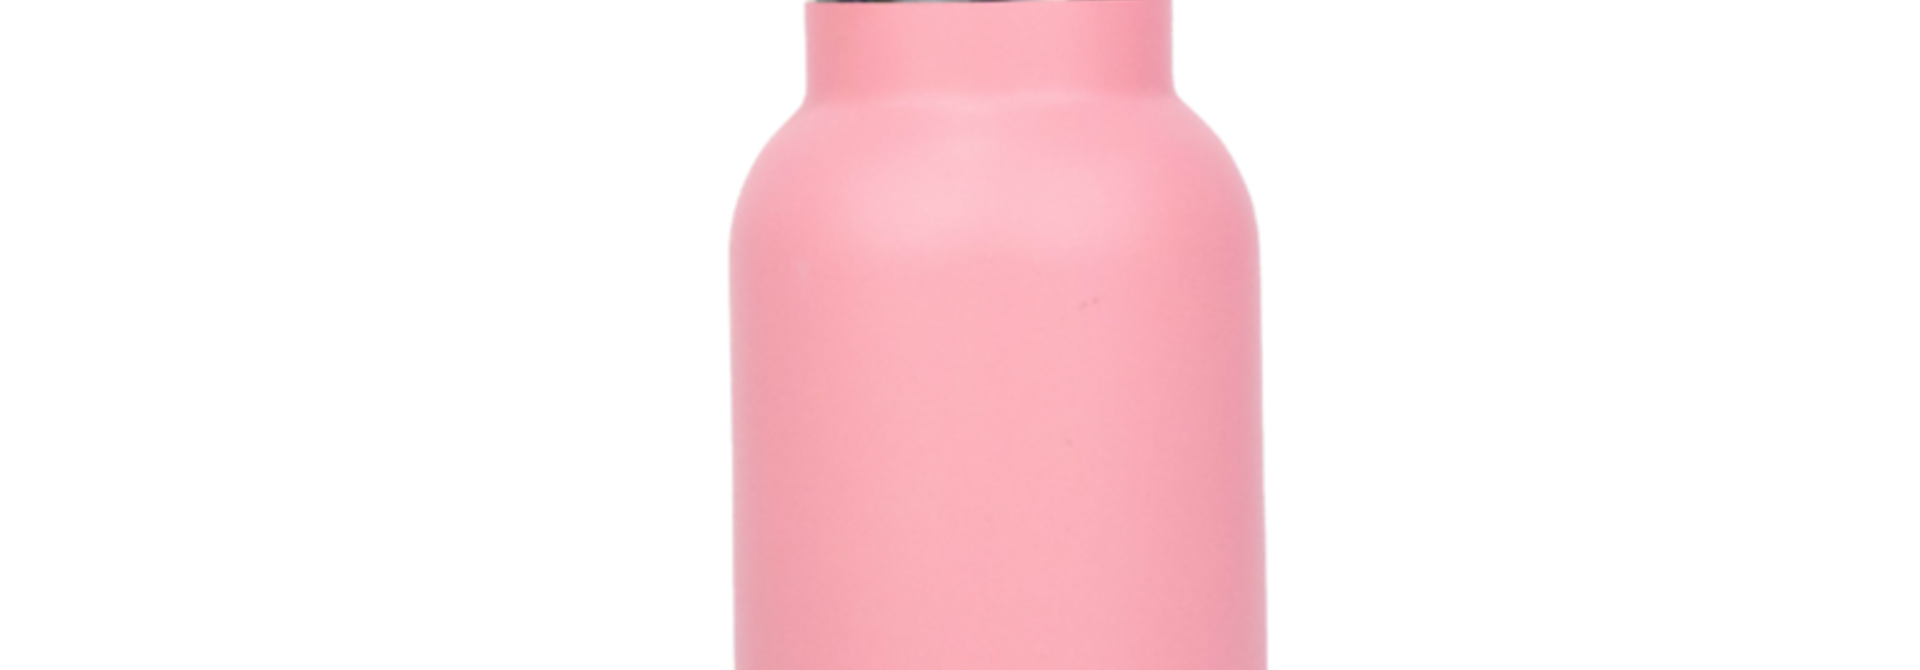 MontiiCo Mini Thermos Bottle - Stainless Steel - Strawberry Pink - 350ml